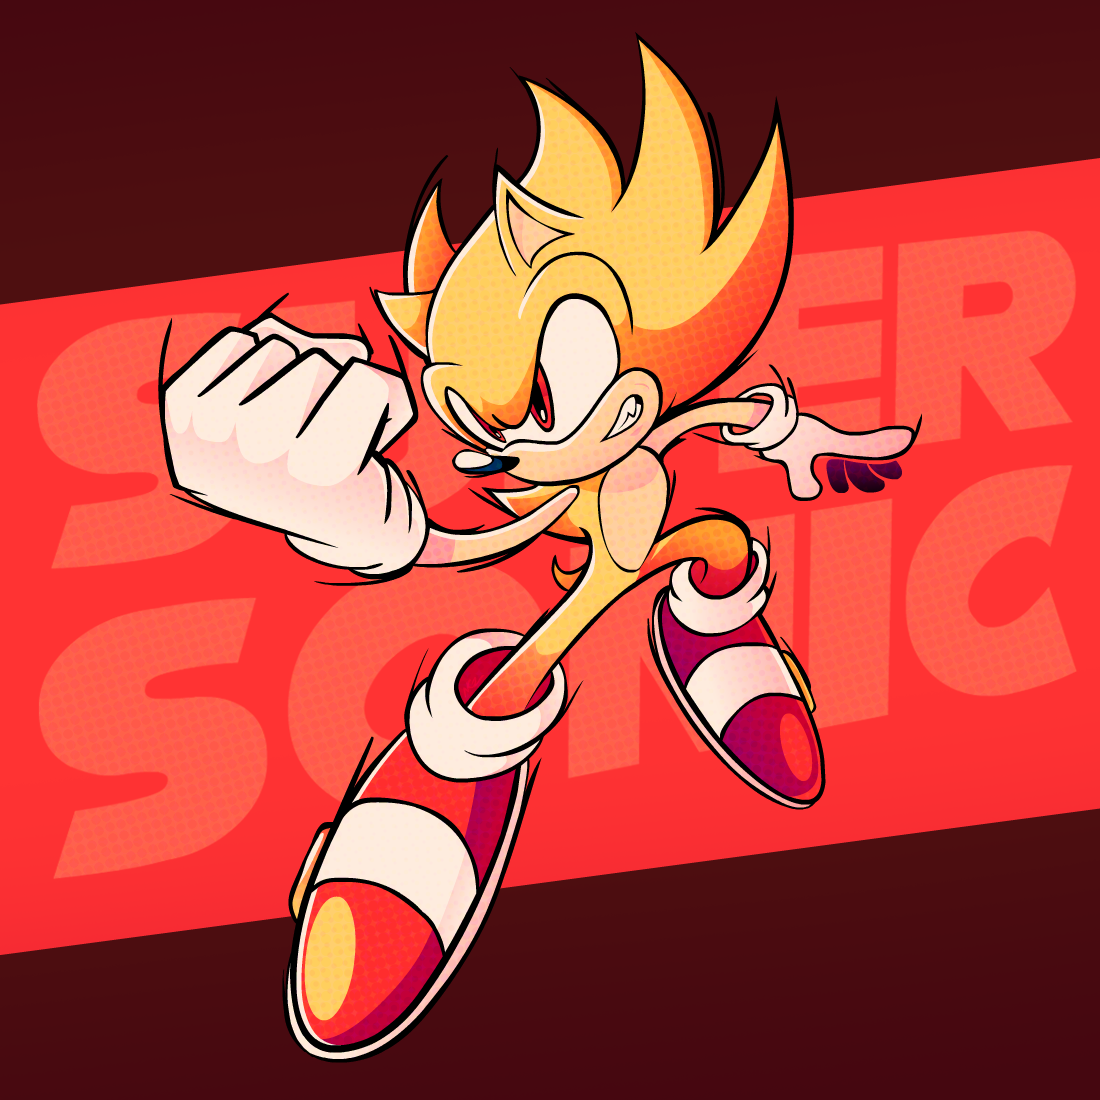 Super Sonic vs The End-Sonic Frontiers by Linkabel32 on DeviantArt